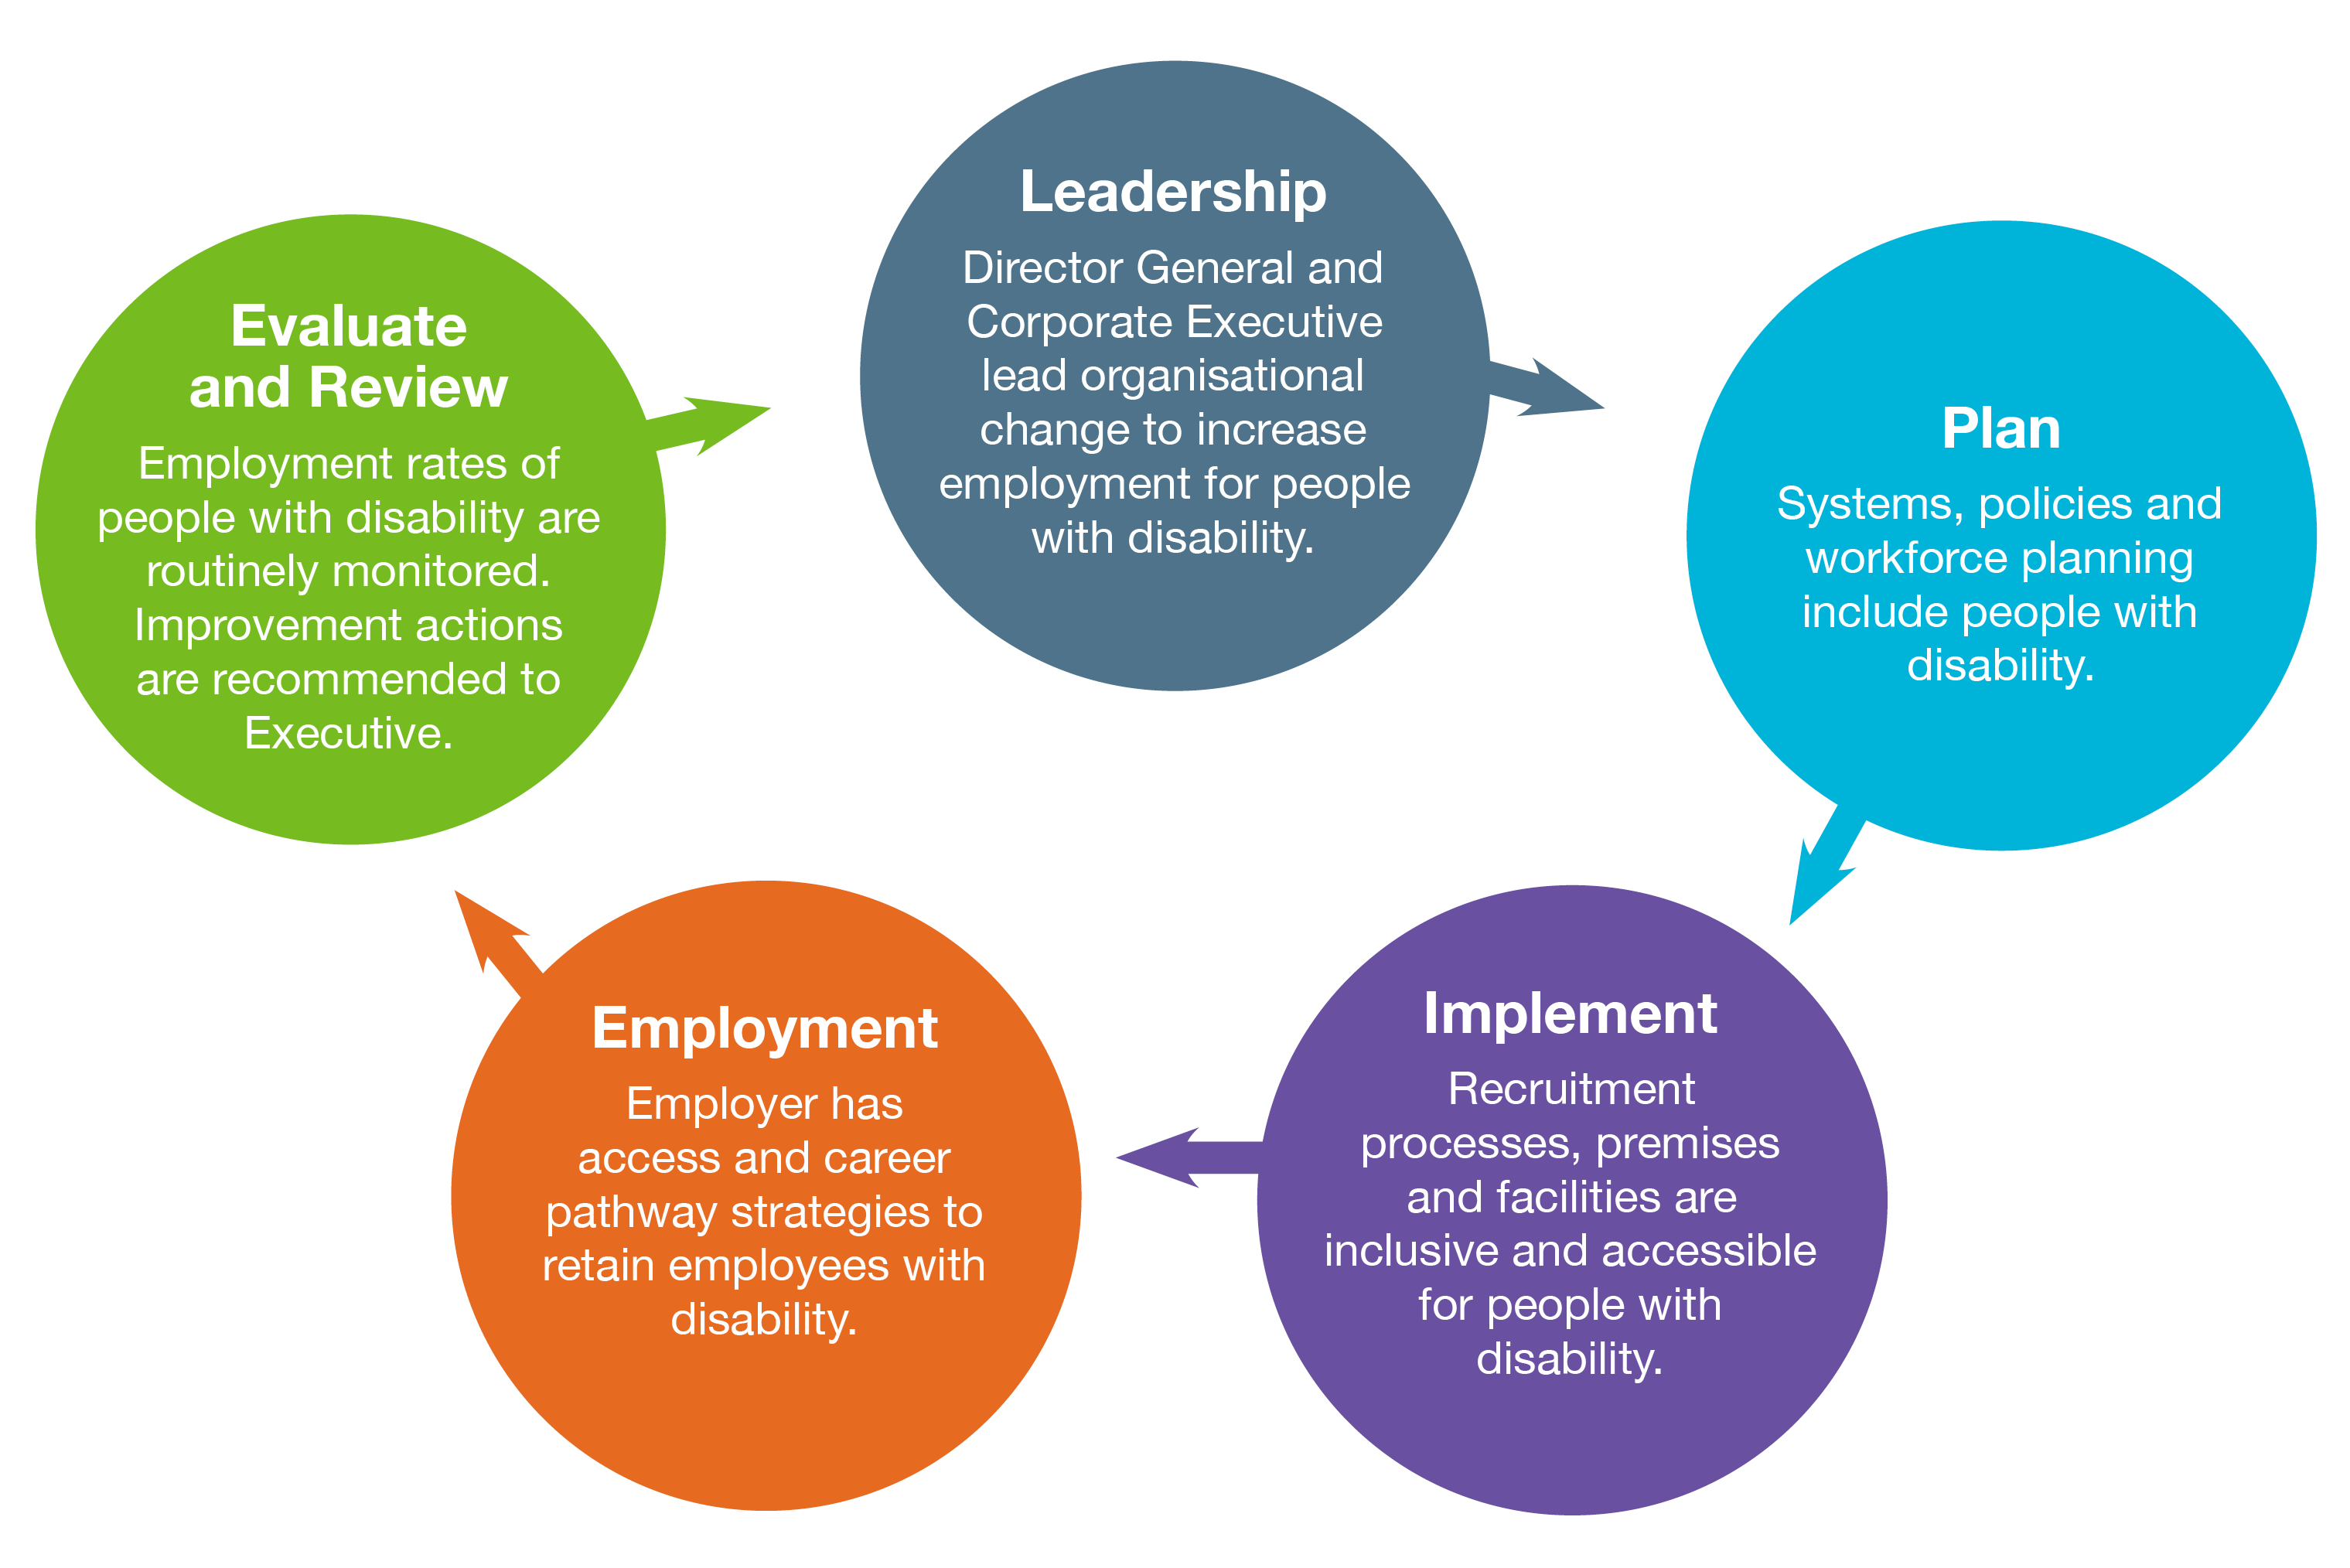 Employment Confidence Flowchart; Leadership: Director General and Corporate Executive lead organisational change to increase employment for people with disability. Plan: Systems, policies and workforce planning include people with disability. Implement: Recruitment processes, premises and facilities are inclusive and accessible for people with disability. Employment: Employer has access and career pathway strategies to retain employees with disability. Evaluate and Review: Employment rates of people with disability are routinely monitored. Improvement actions are recommended to Executive.